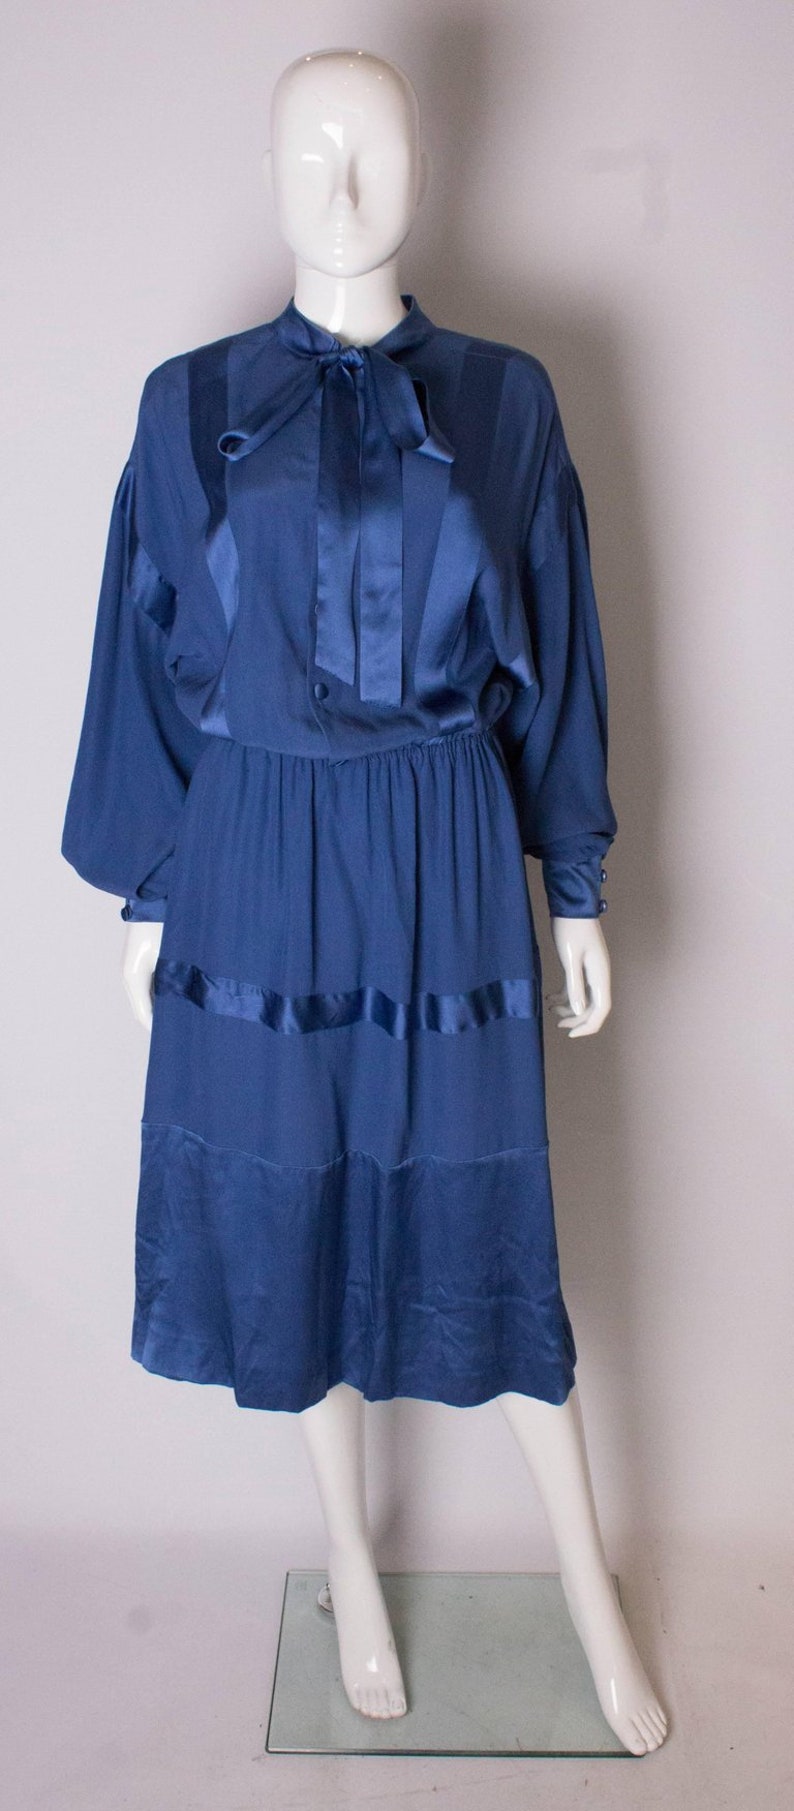 A Vintage 1970s Blue Silk Dress by Stefano Ricci for Herbie - Etsy